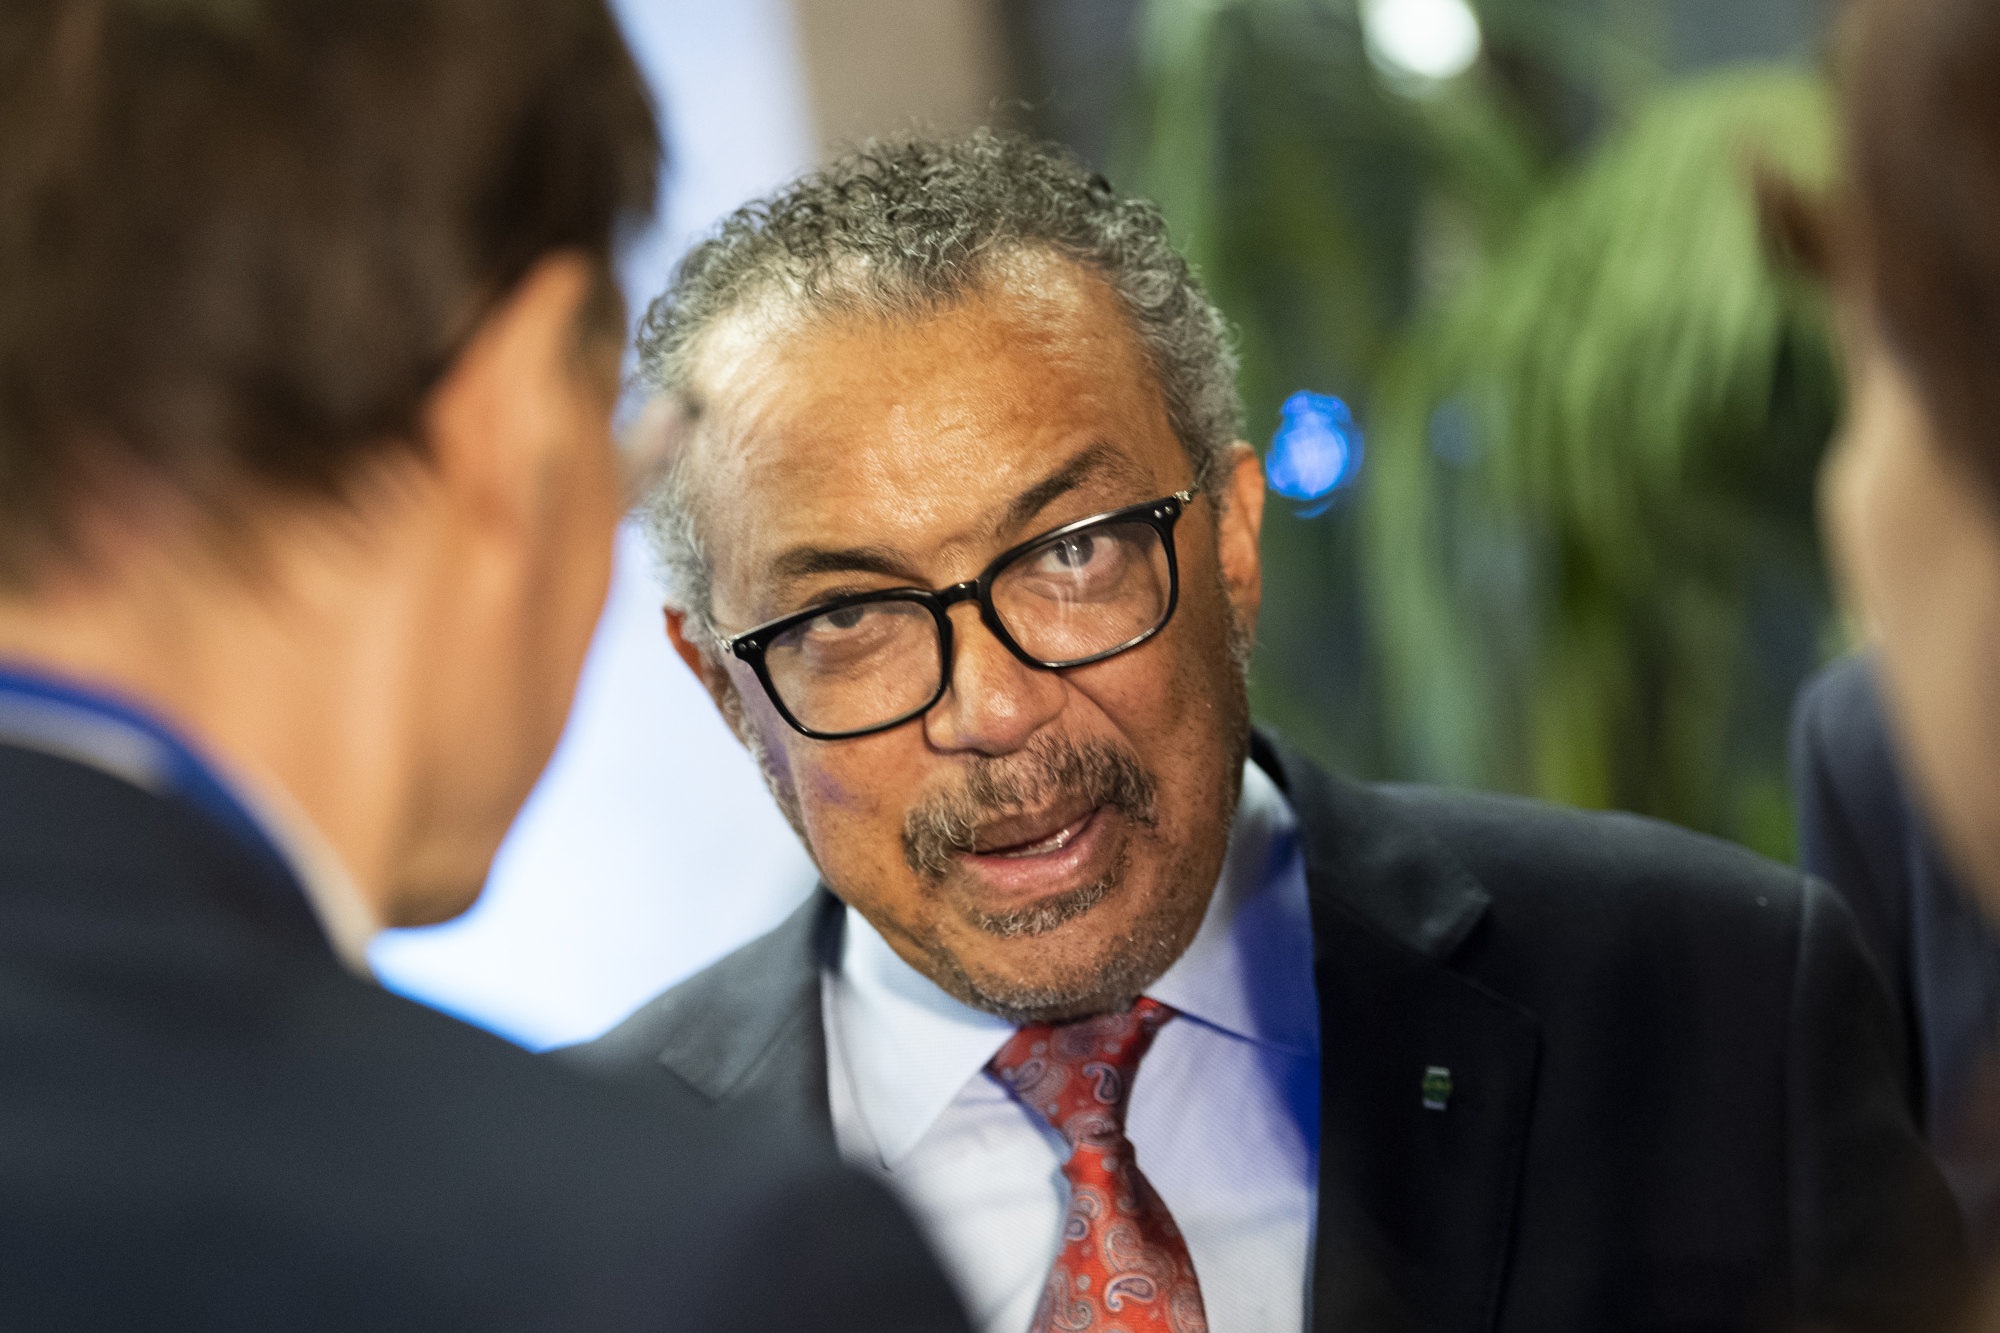 Tedros Adhanom Ghebreyesus, director general of the World Health Organization, said the end of the Covid-19 pandemic is “in sight”, but had not yet arrived. Photo: dpa